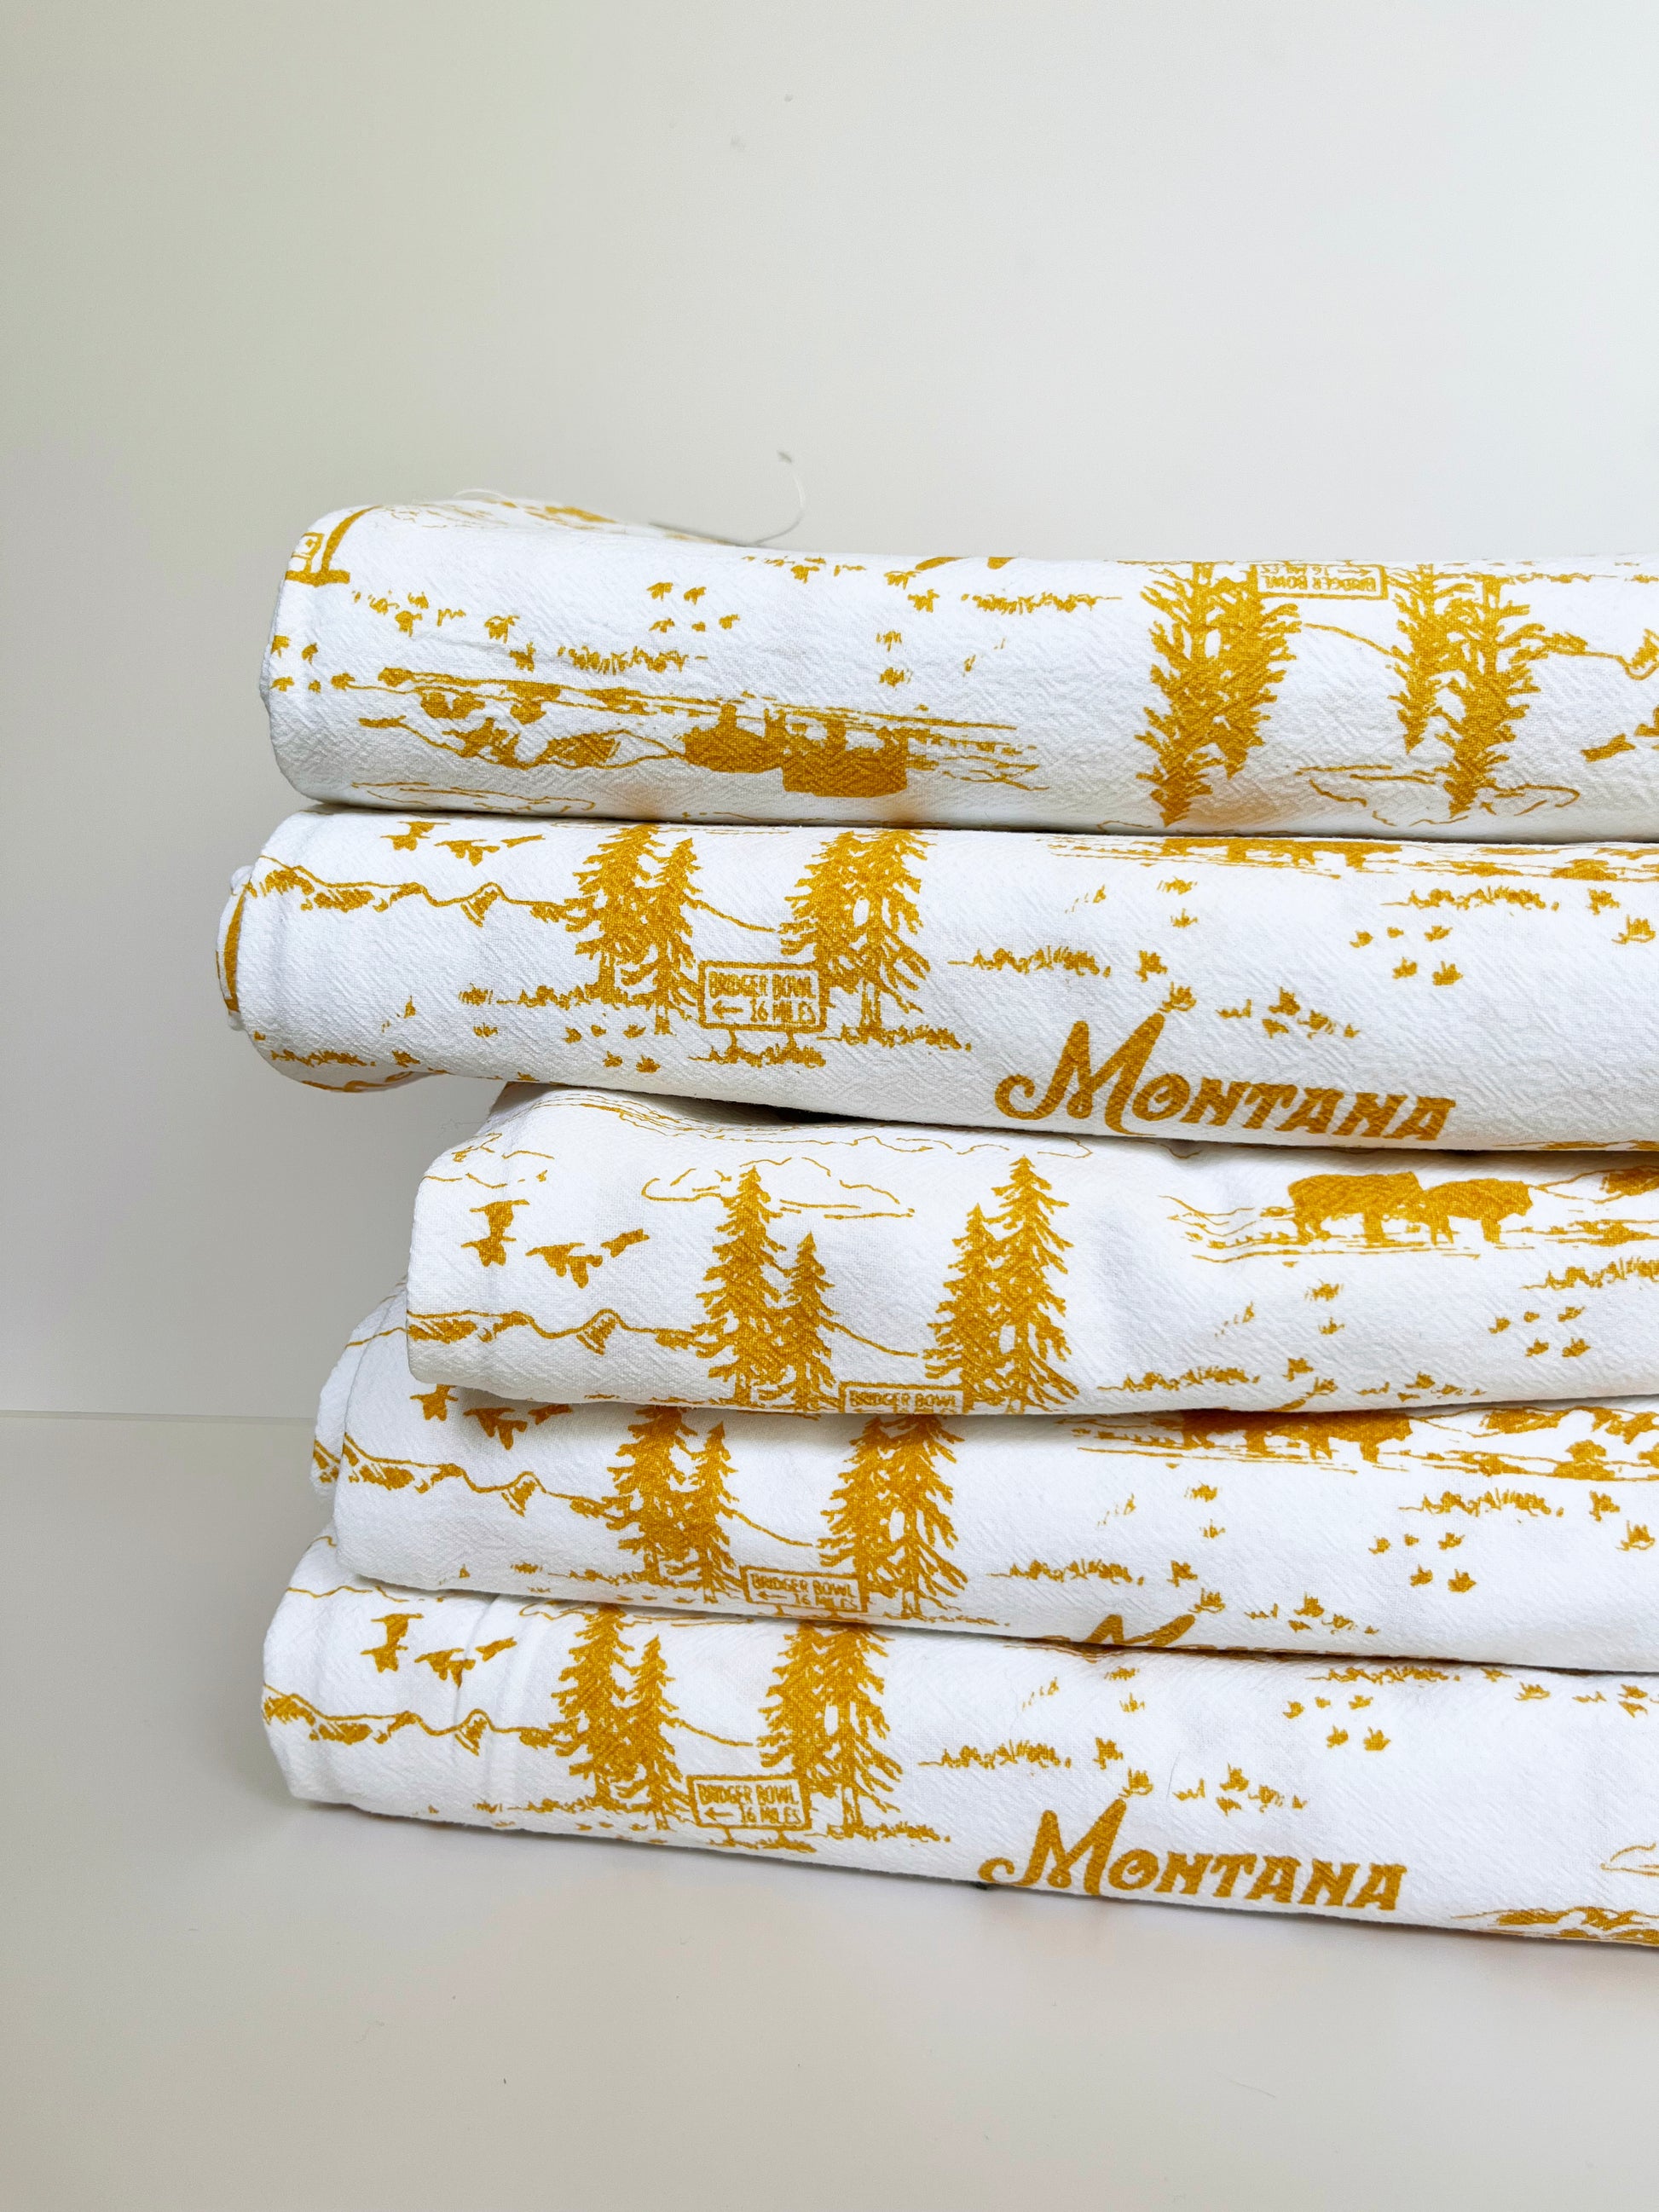 coin laundry montana kitchen towel hand screen printed print with cowboy western motif mountains trees yellow ochre yellowstone national park souvenir dish towel tea towel cotton retro style